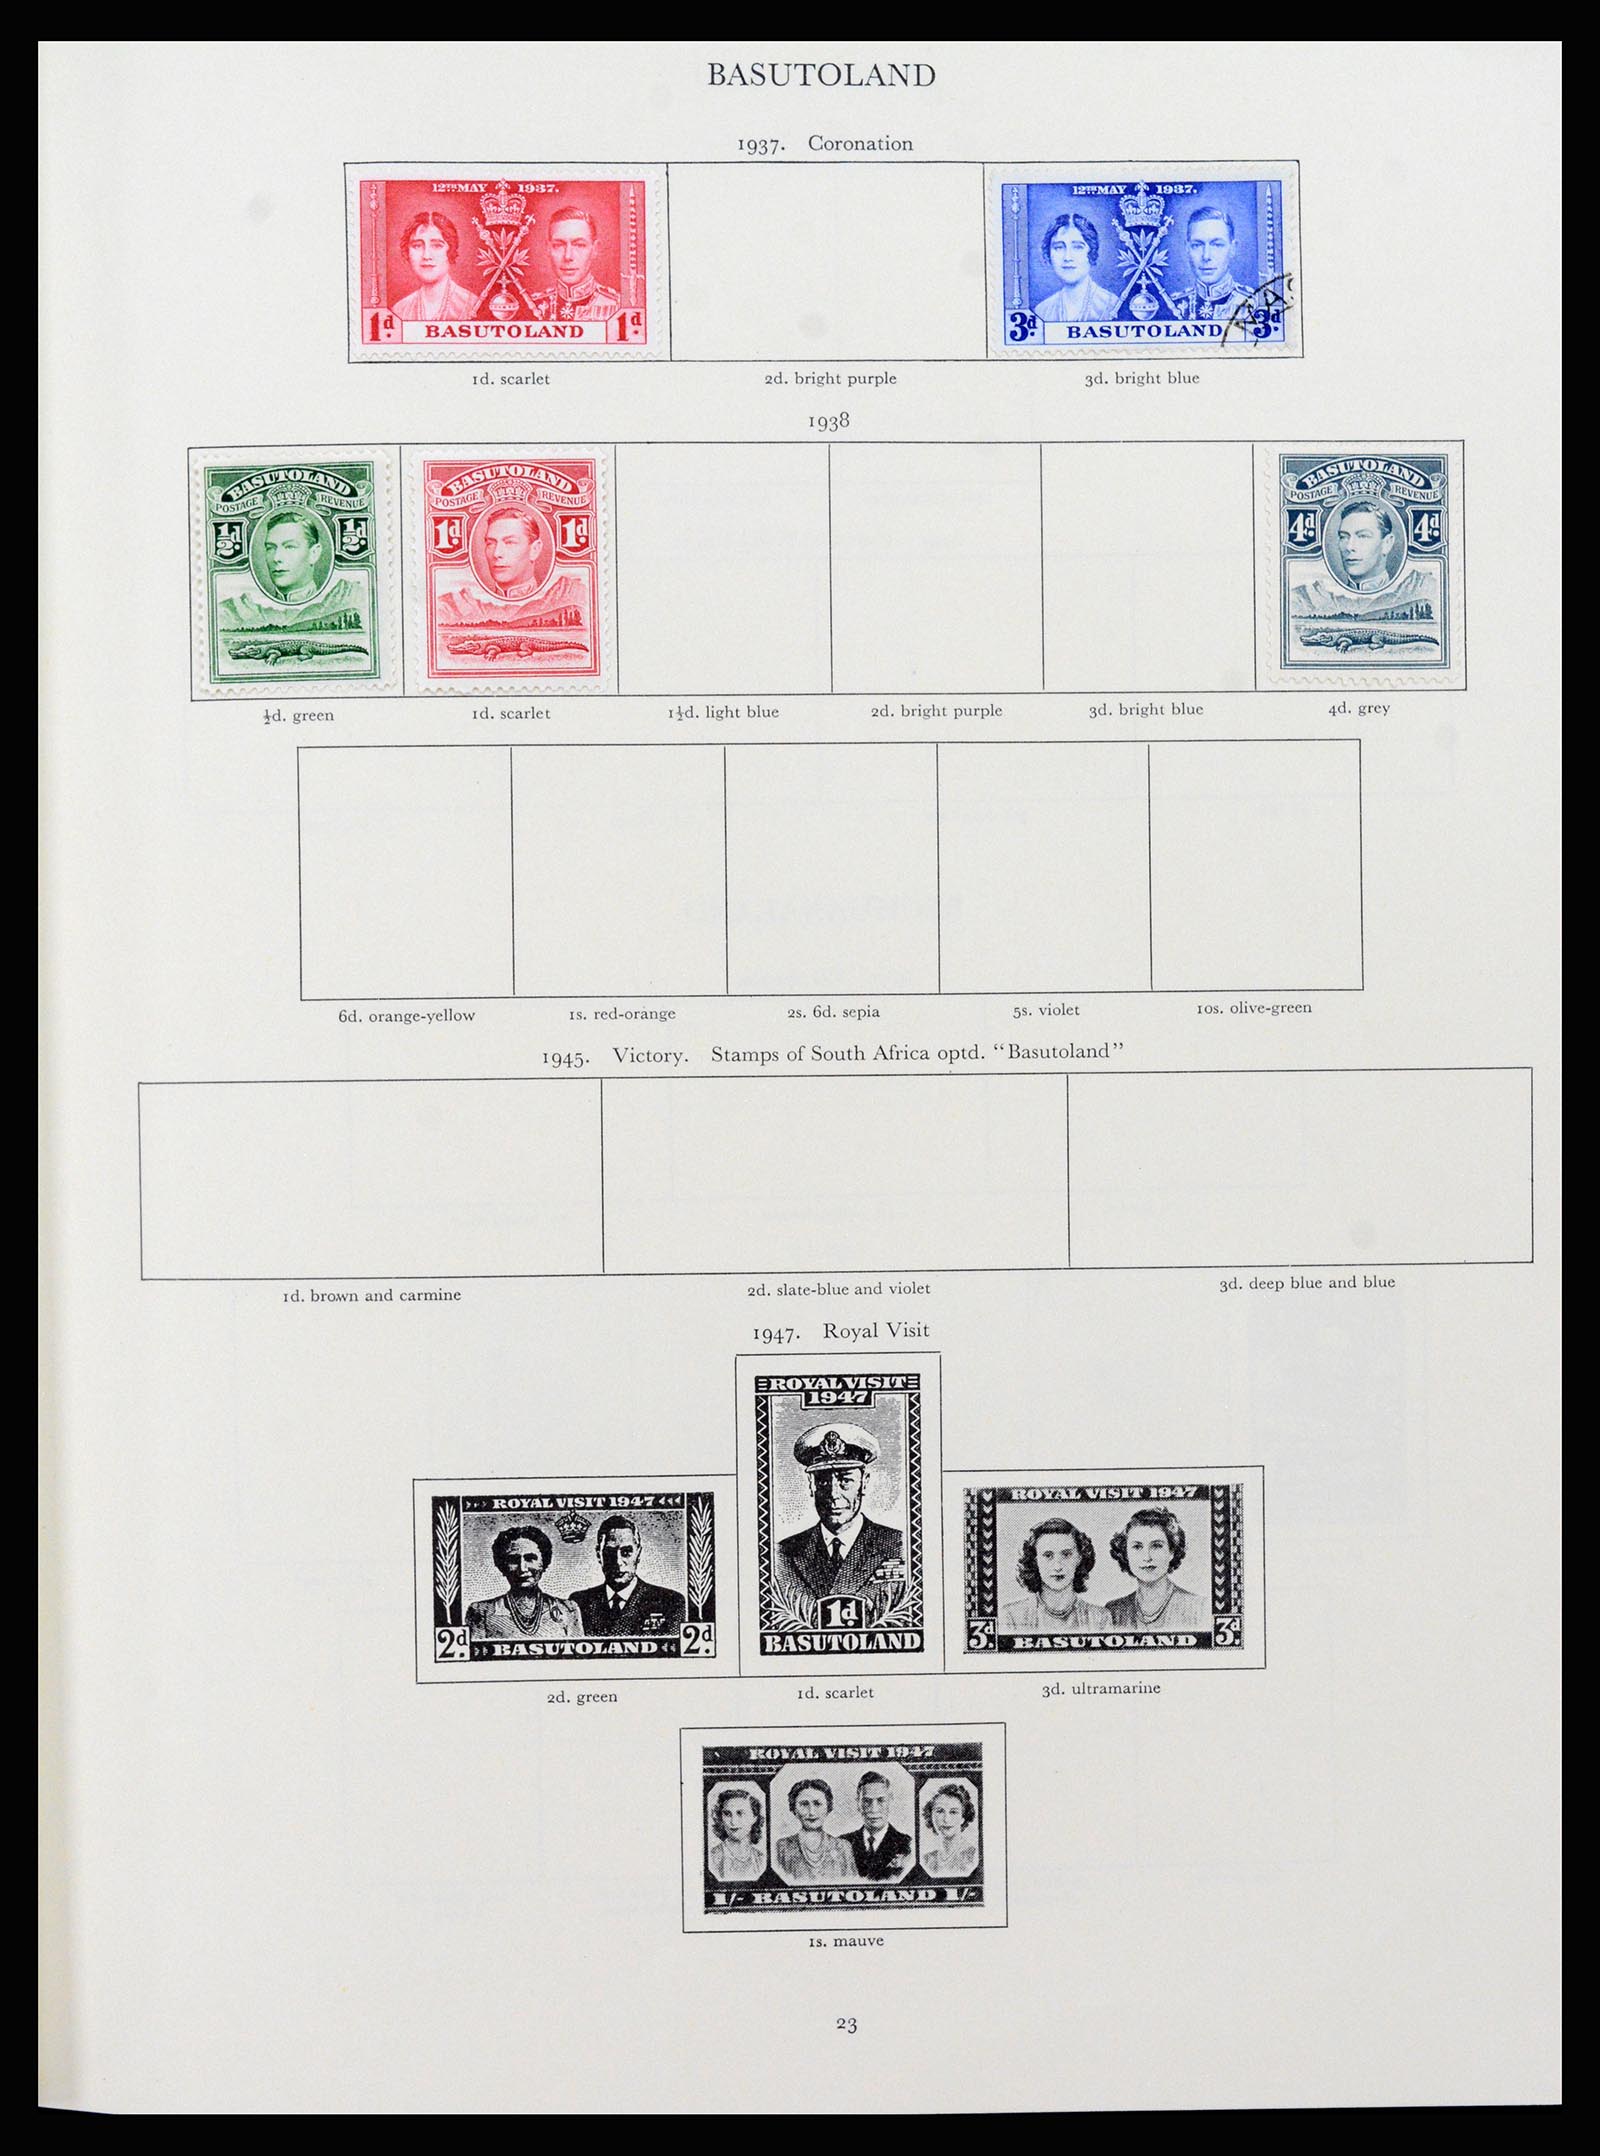 37267 011 - Stamp collection 37267 British Commonwealth 1937-1951.